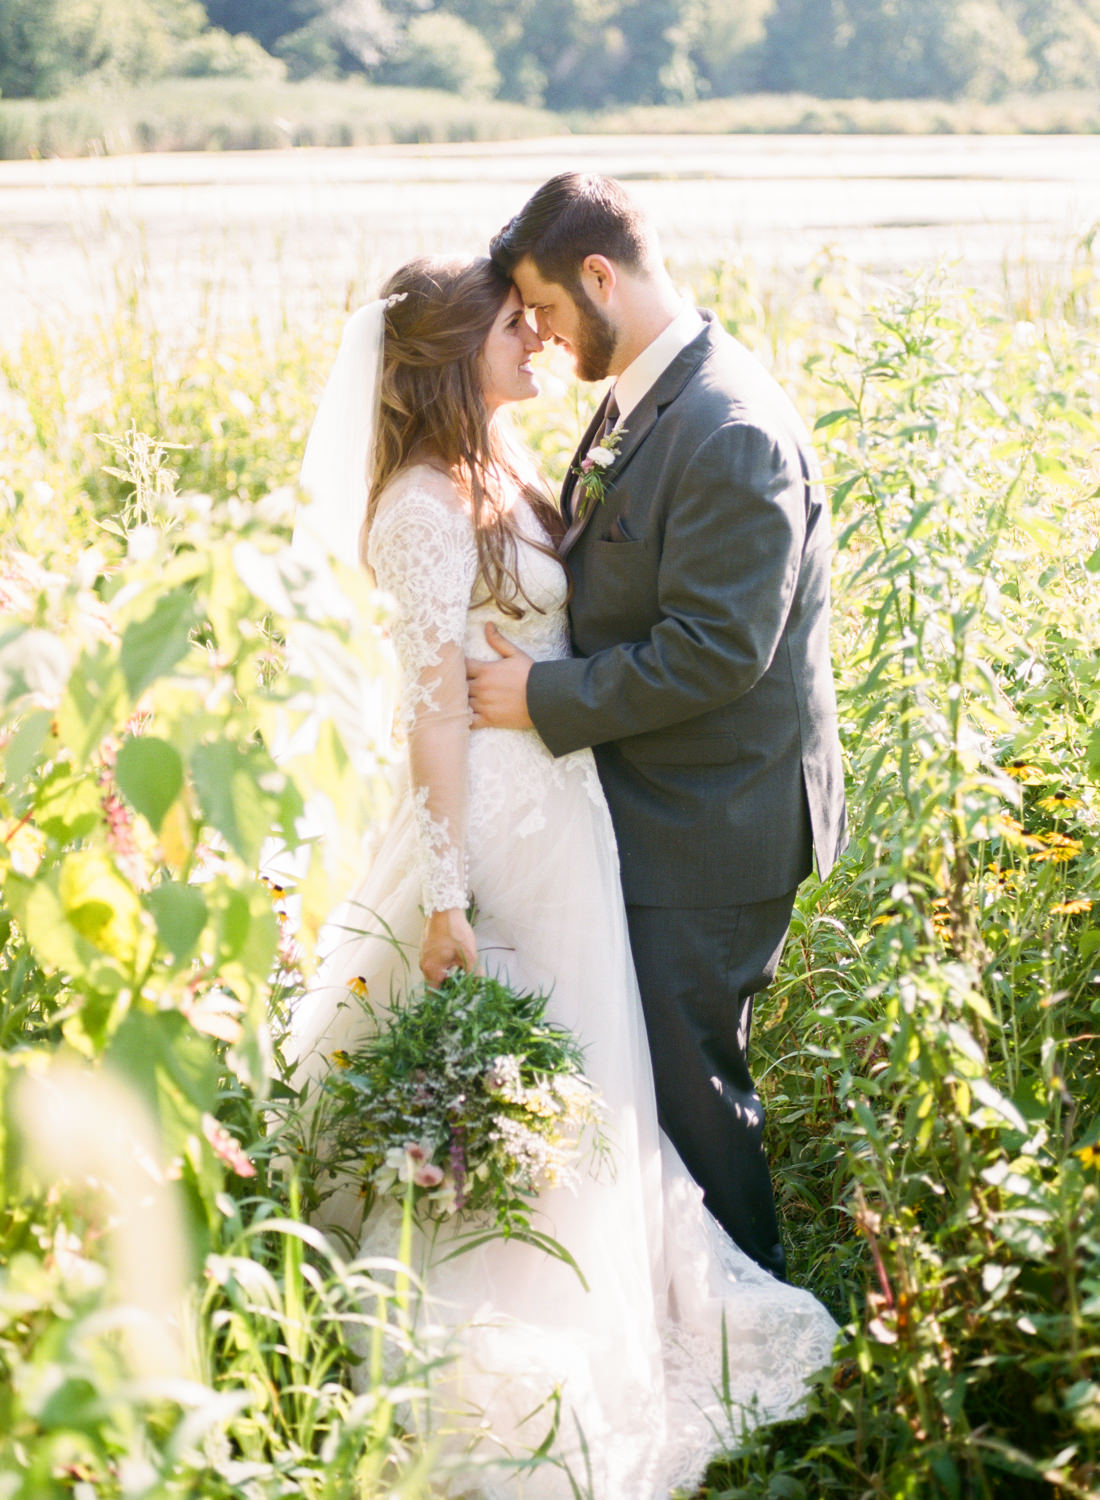 Bride and groom smiling in field with lake; St. Louis fine art film wedding photographer Erica Robnett Photography